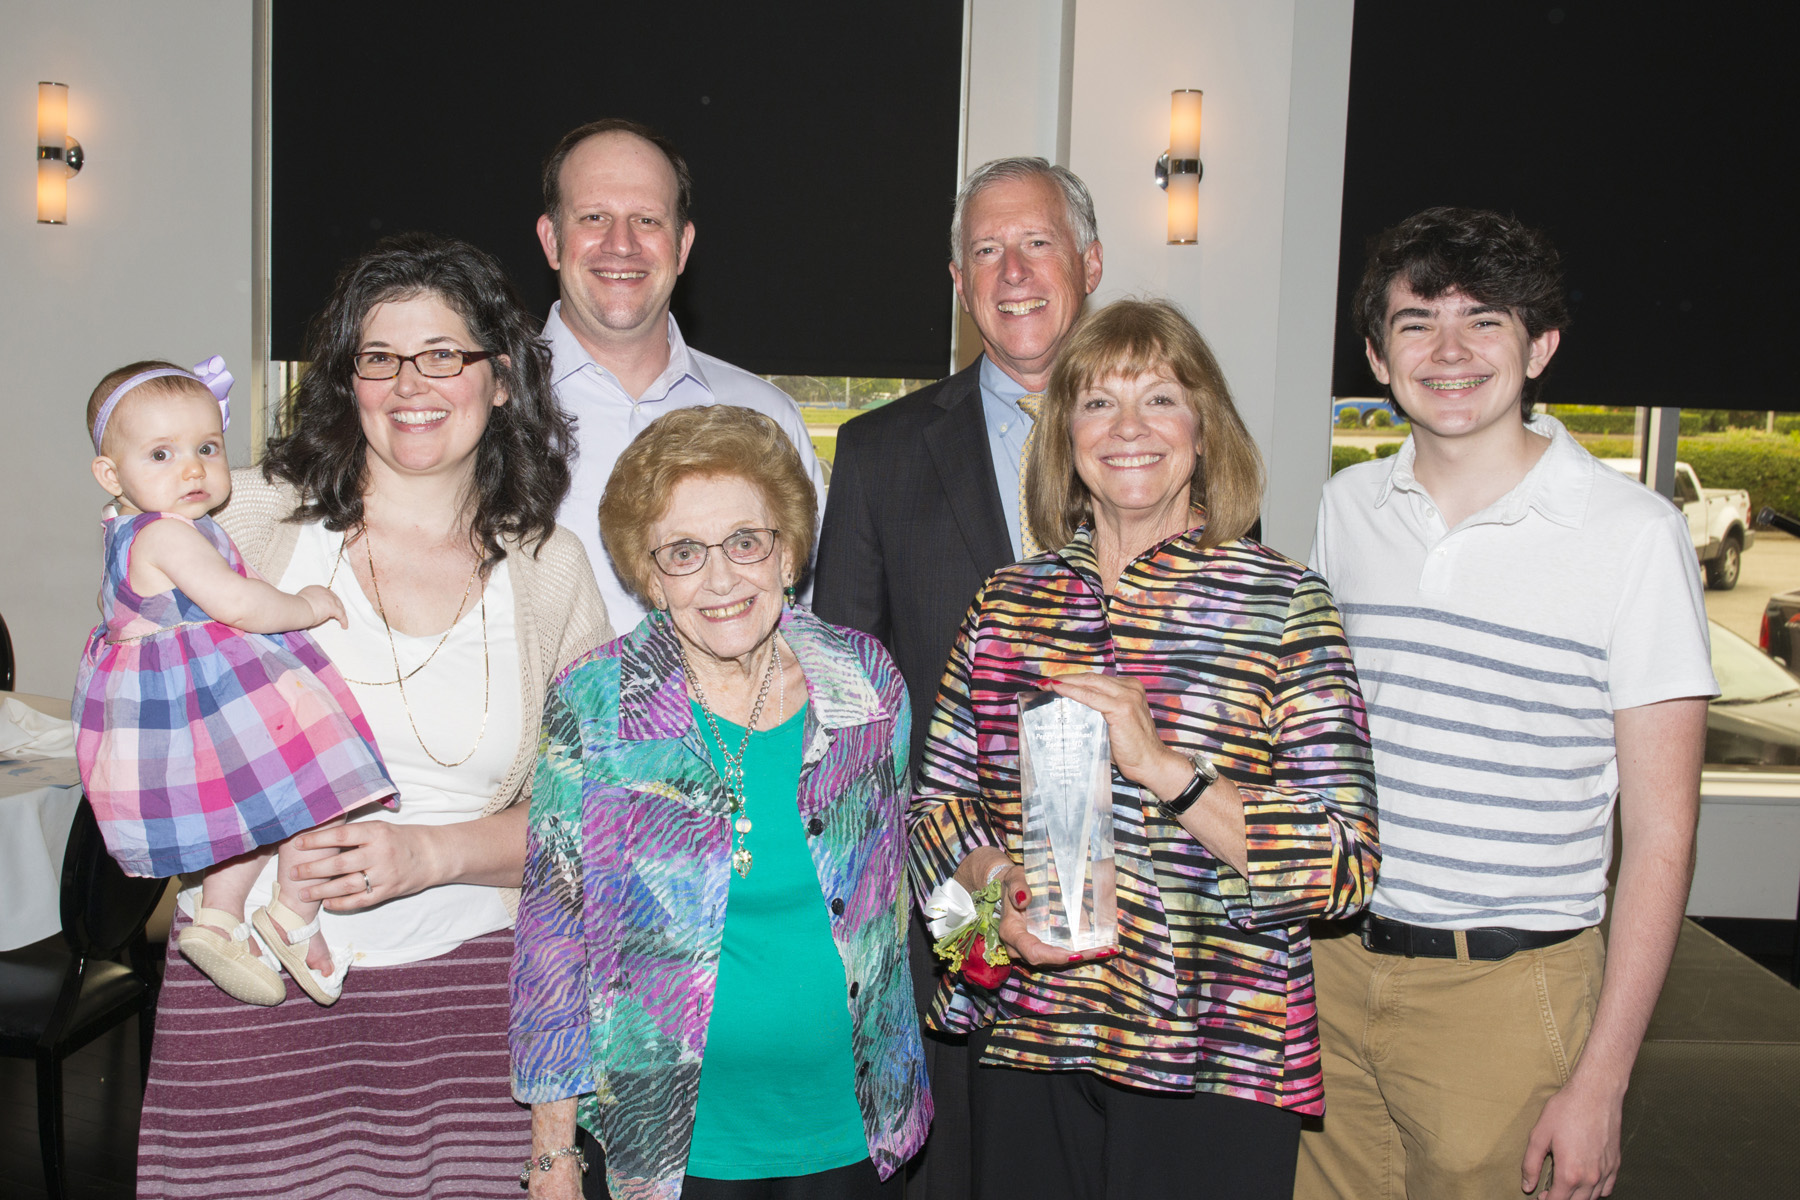 Michael and Peggy Borkon pose with family after accepting the 2018 Foundation Fellow Award